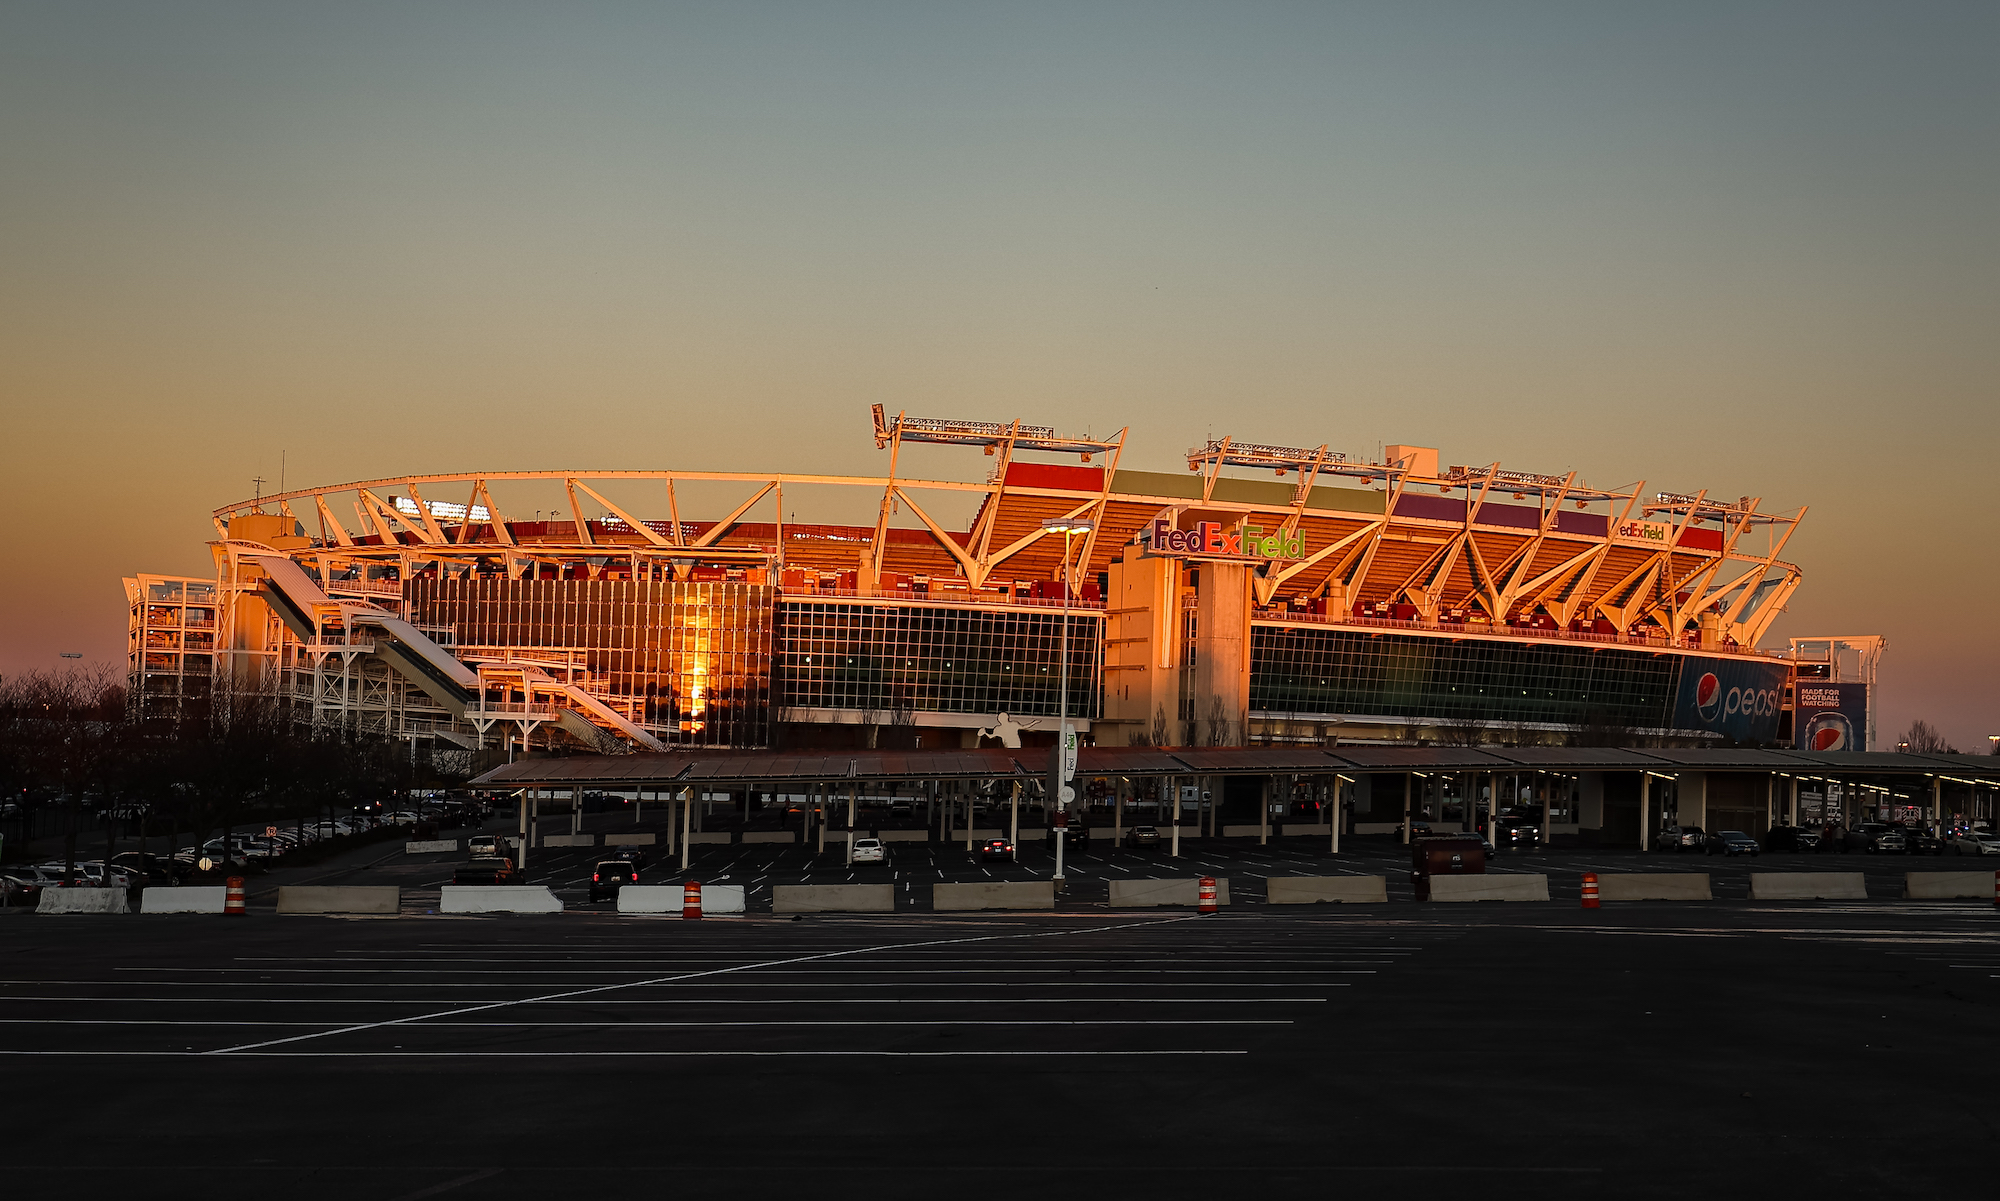 LANDOVER, MD - JANUARY 01:A general view of the stadium after the game between the Washington Commanders and the Cleveland Browns at FedExField on January 1, 2023 in Landover, Maryland. (Photo by Scott Taetsch/Getty Images)